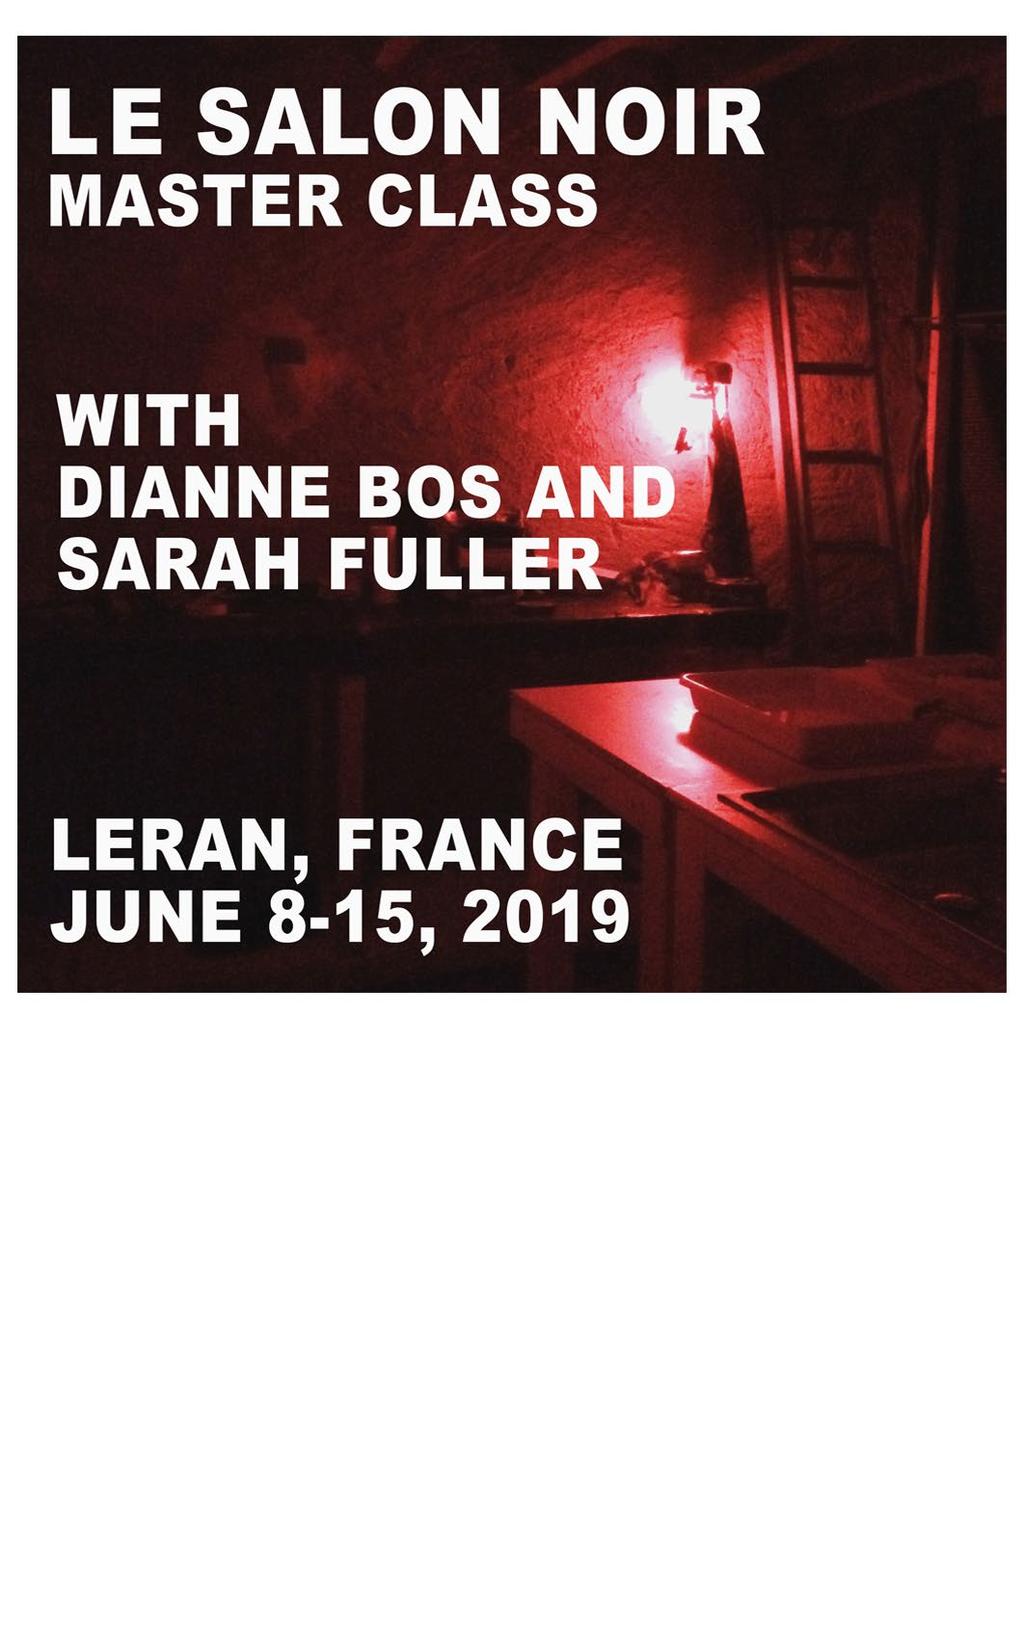 Le Salon Noir : Master Class* is designed for intermediate practitioners with an understanding of traditional darkroom processes and techniques and are excited to develop their practice among peers